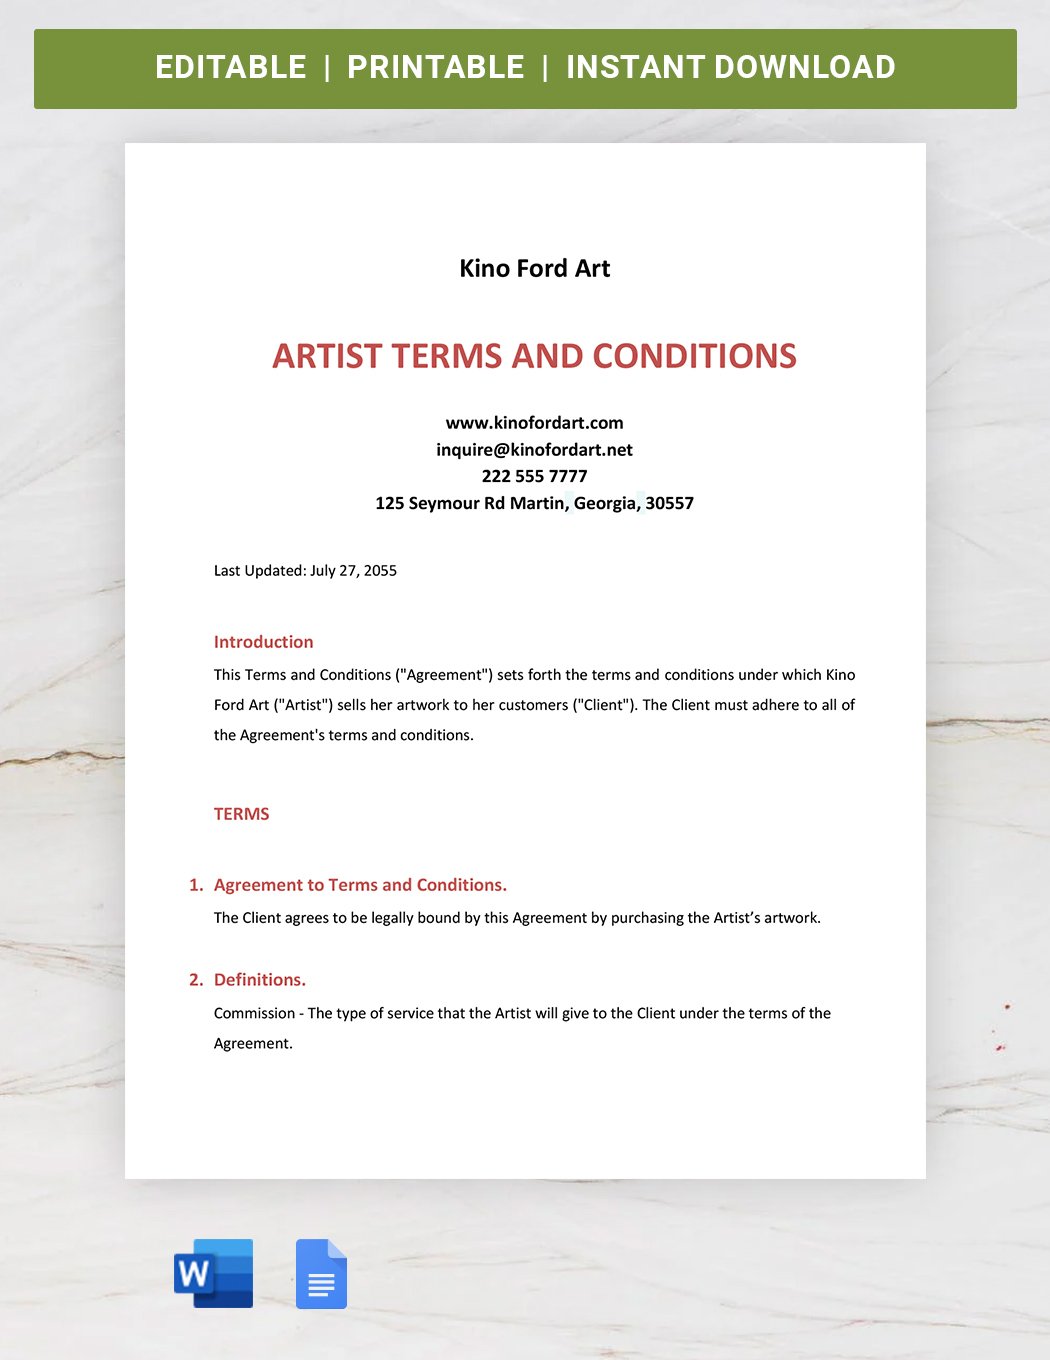 Terms And Conditions Template For Blog Google Docs Word Template net